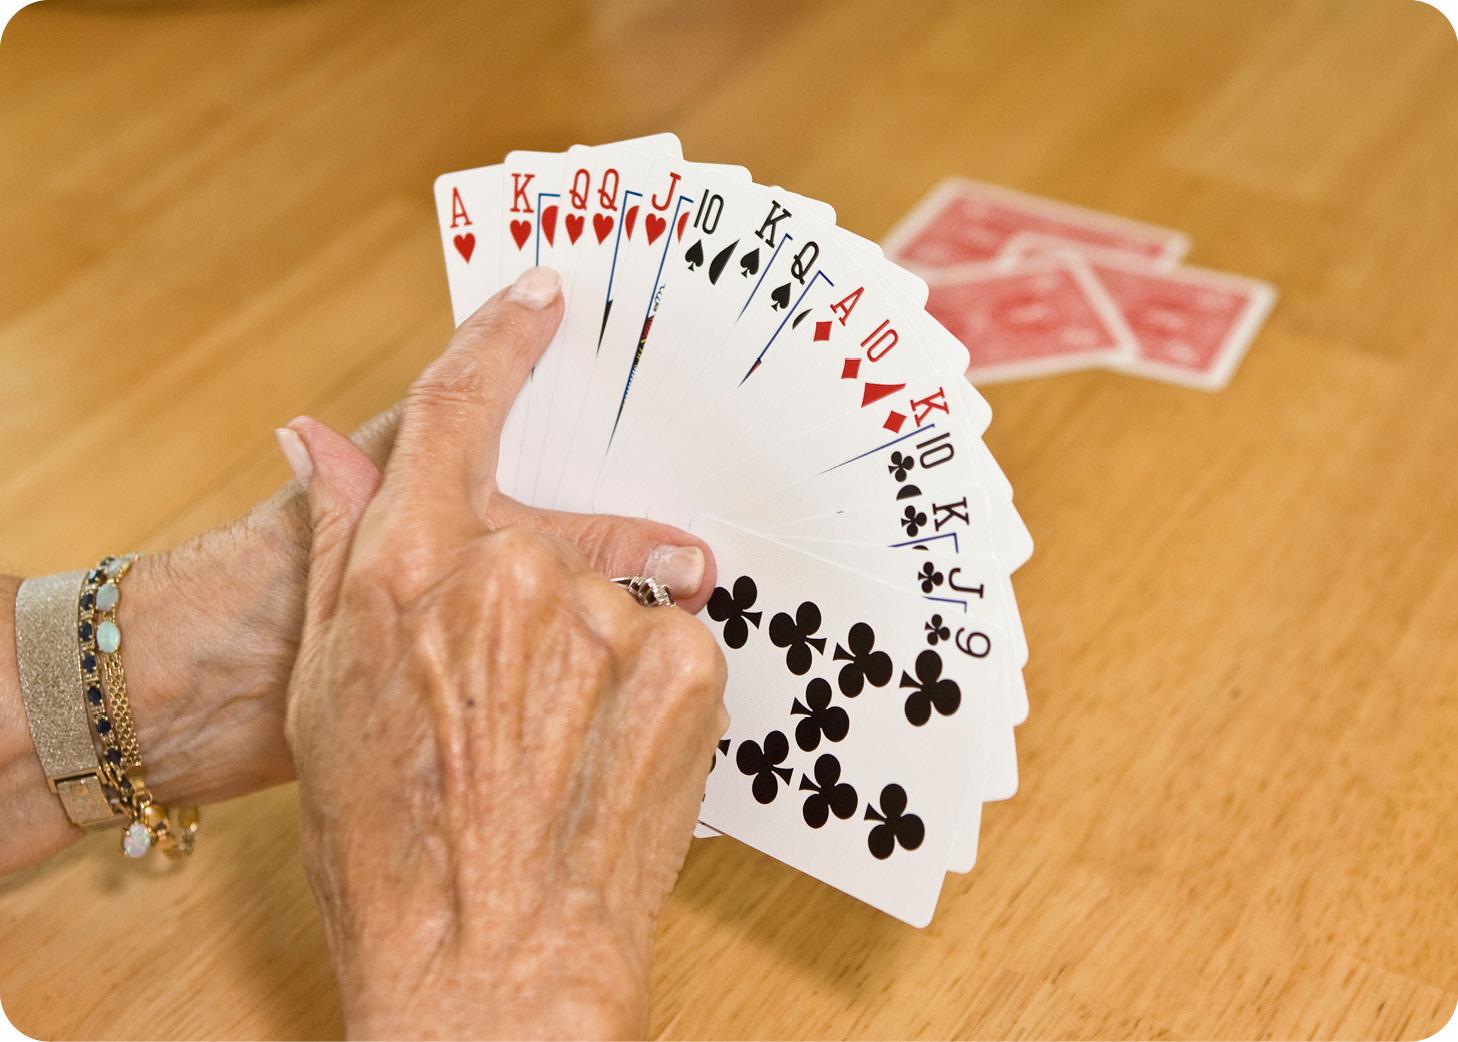 Woman's hands playing cards